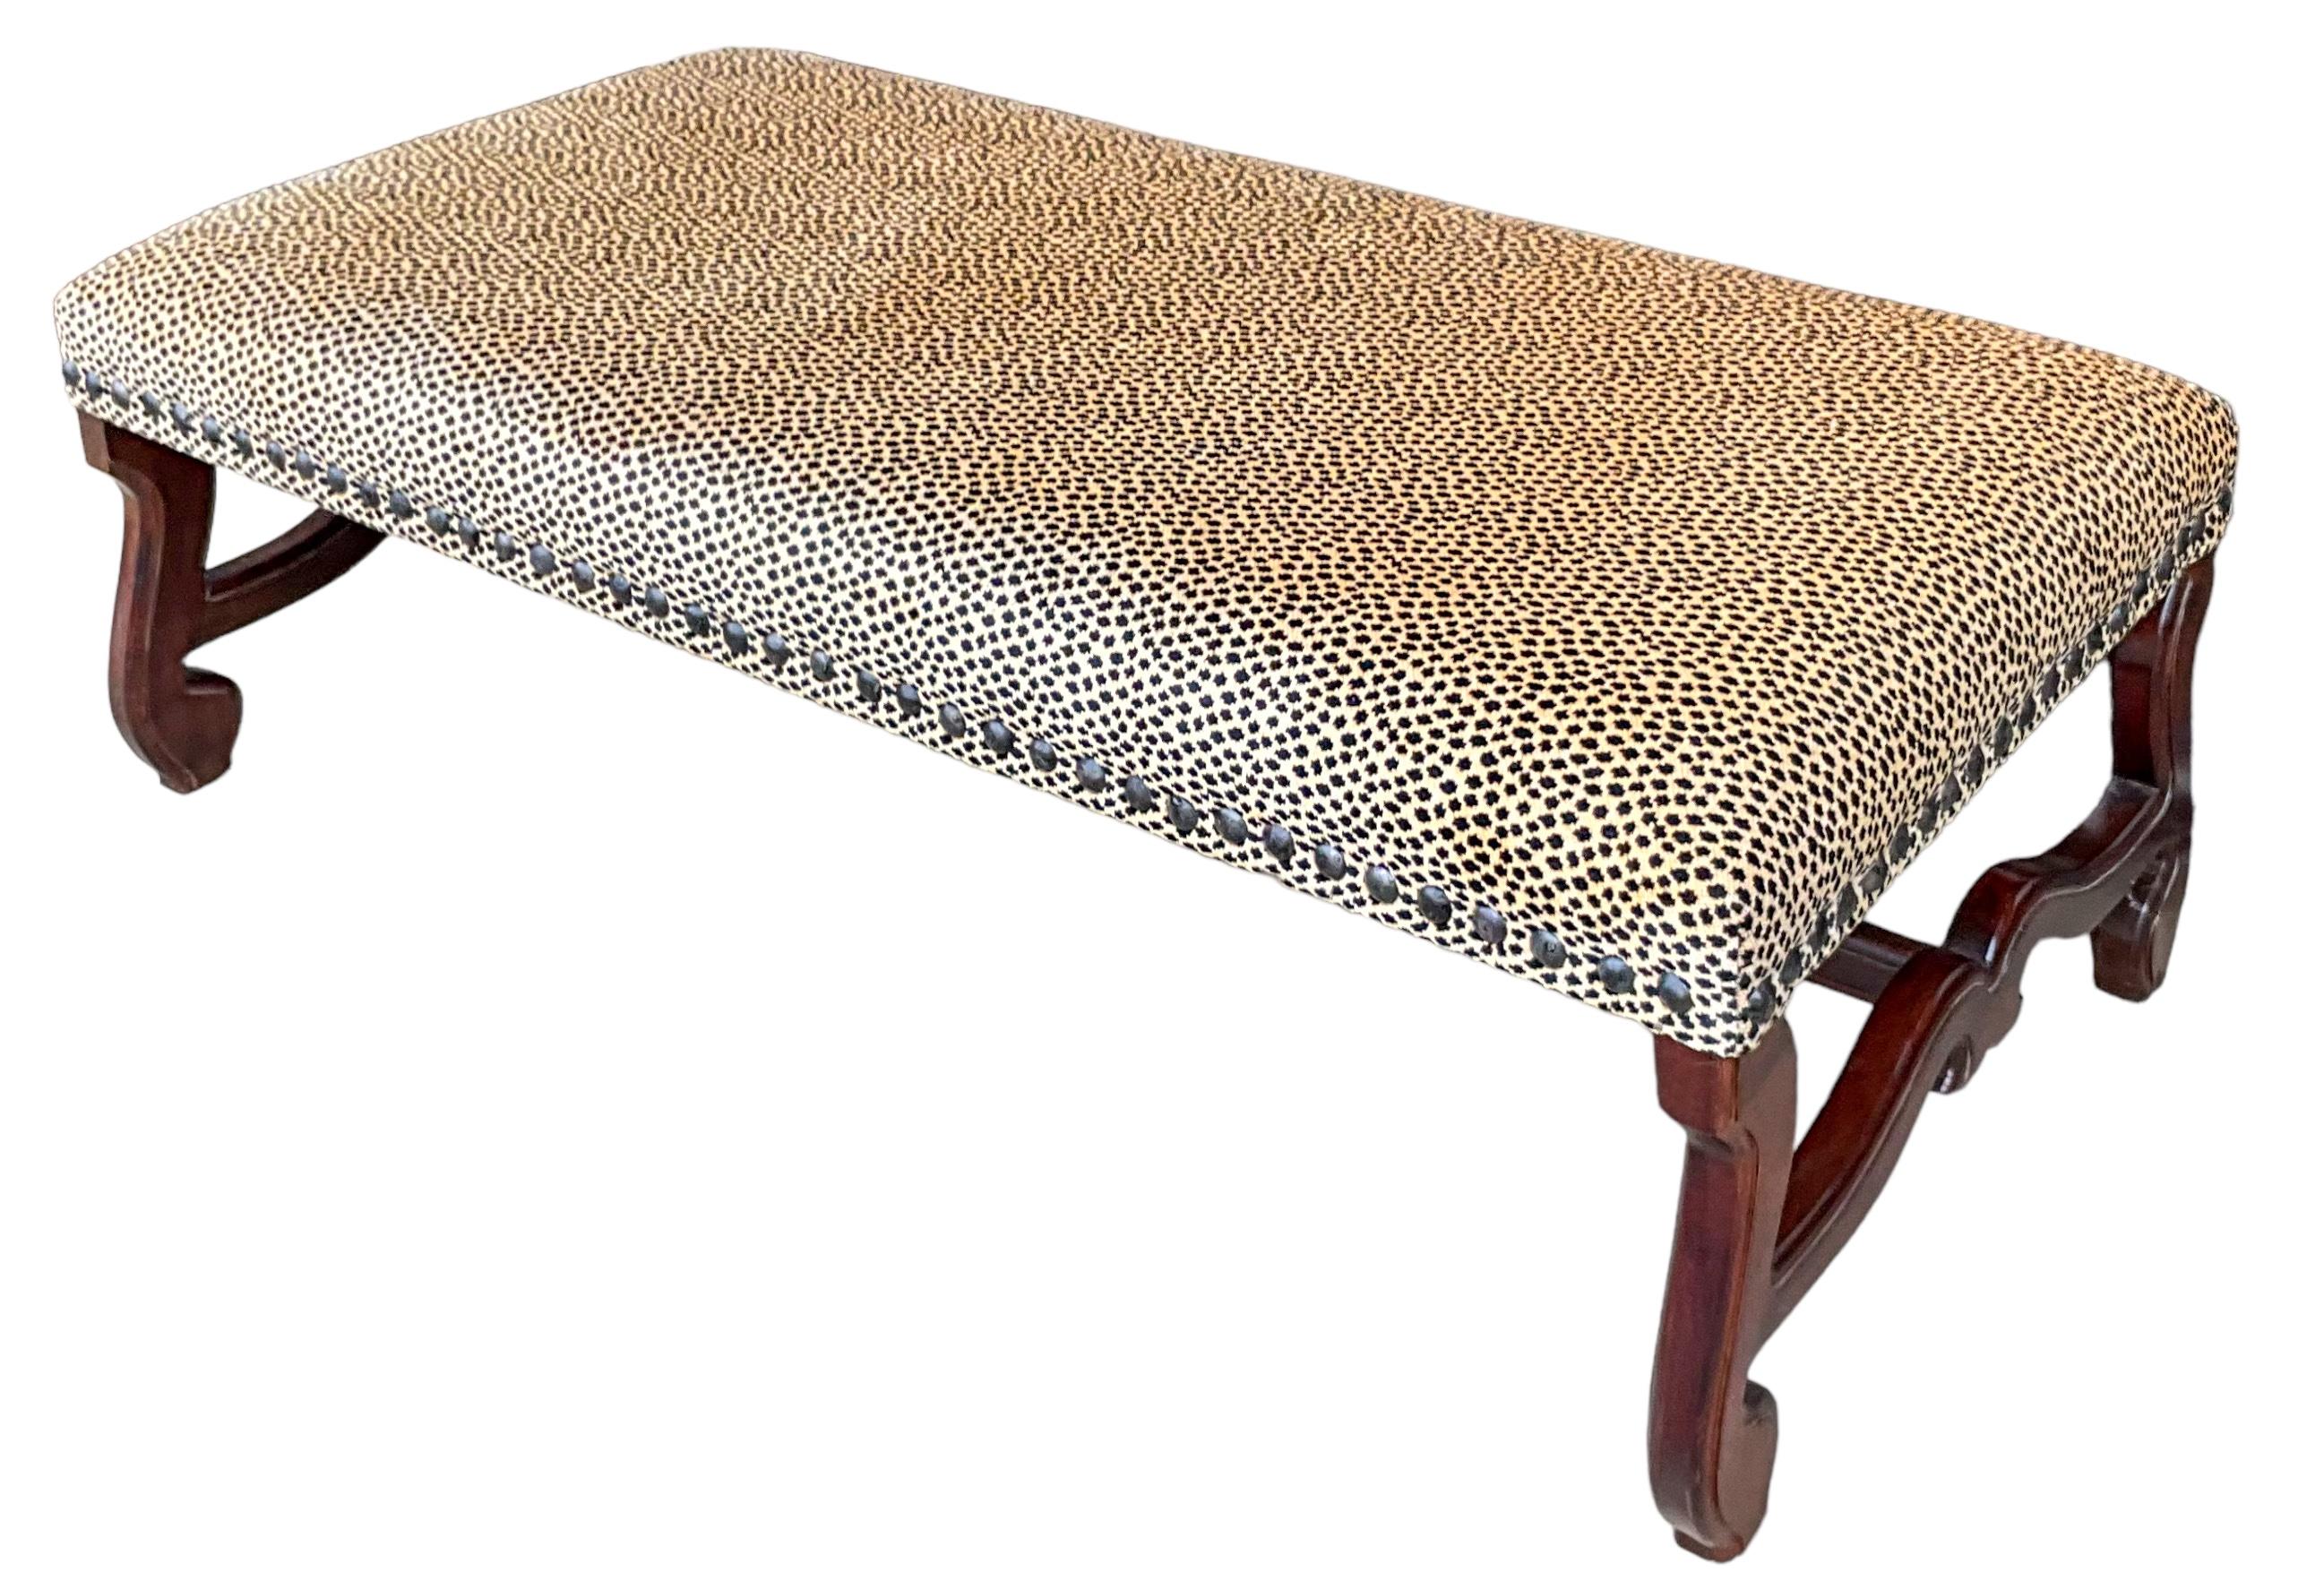 French Style Carved Oak Ottoman W/ Nailheads In Leopard Upholstery In Good Condition For Sale In Kennesaw, GA